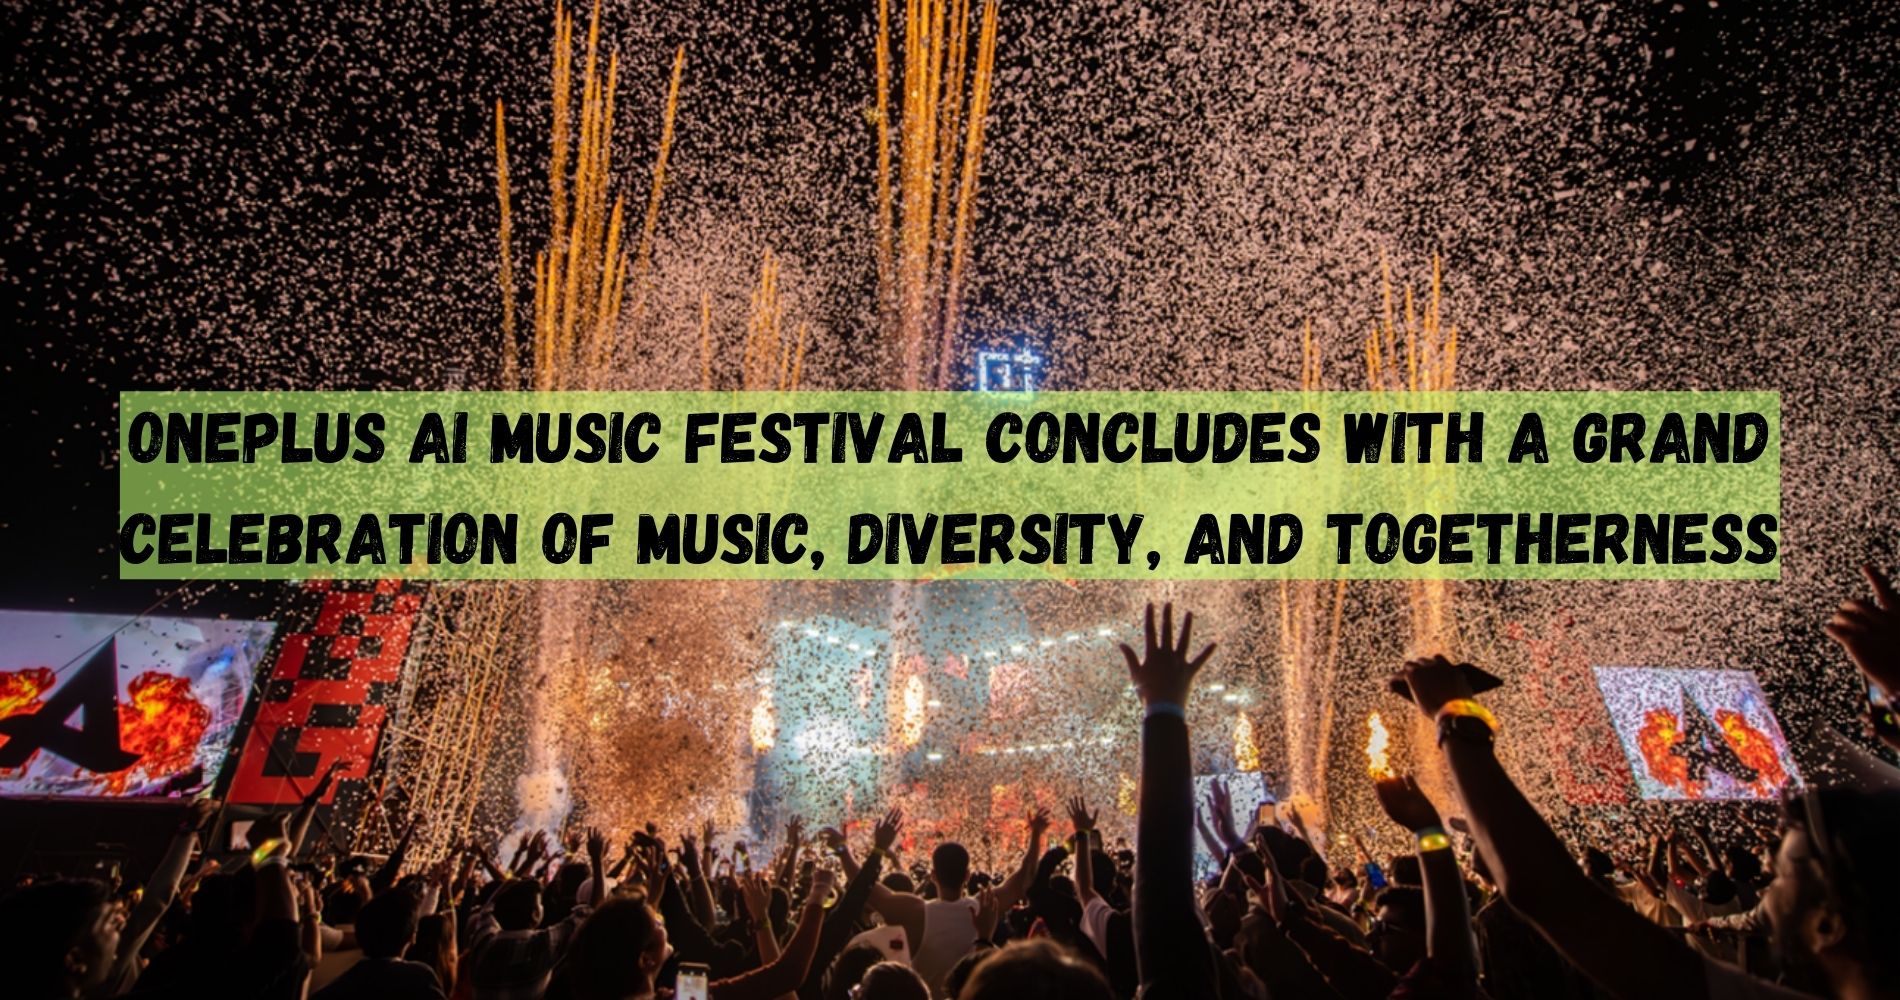 OnePlus AI Music Festival Concludes With A Grand Celebration Of Music, Diversity, And Togetherness